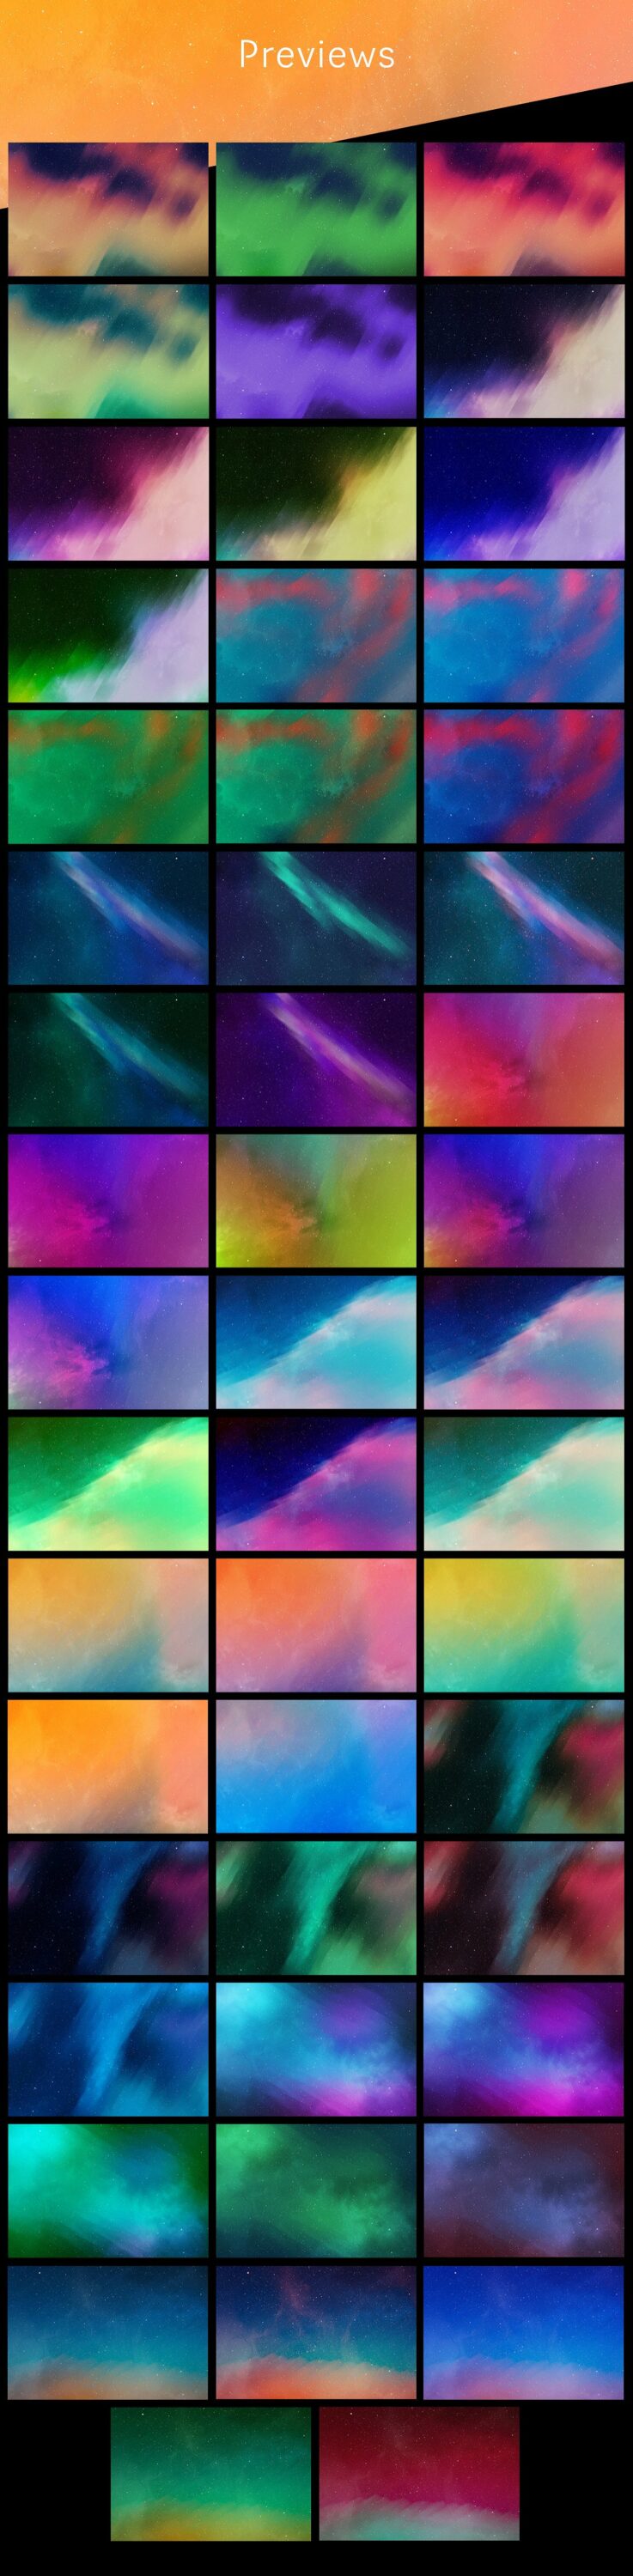 Colorful gradient for different projects.